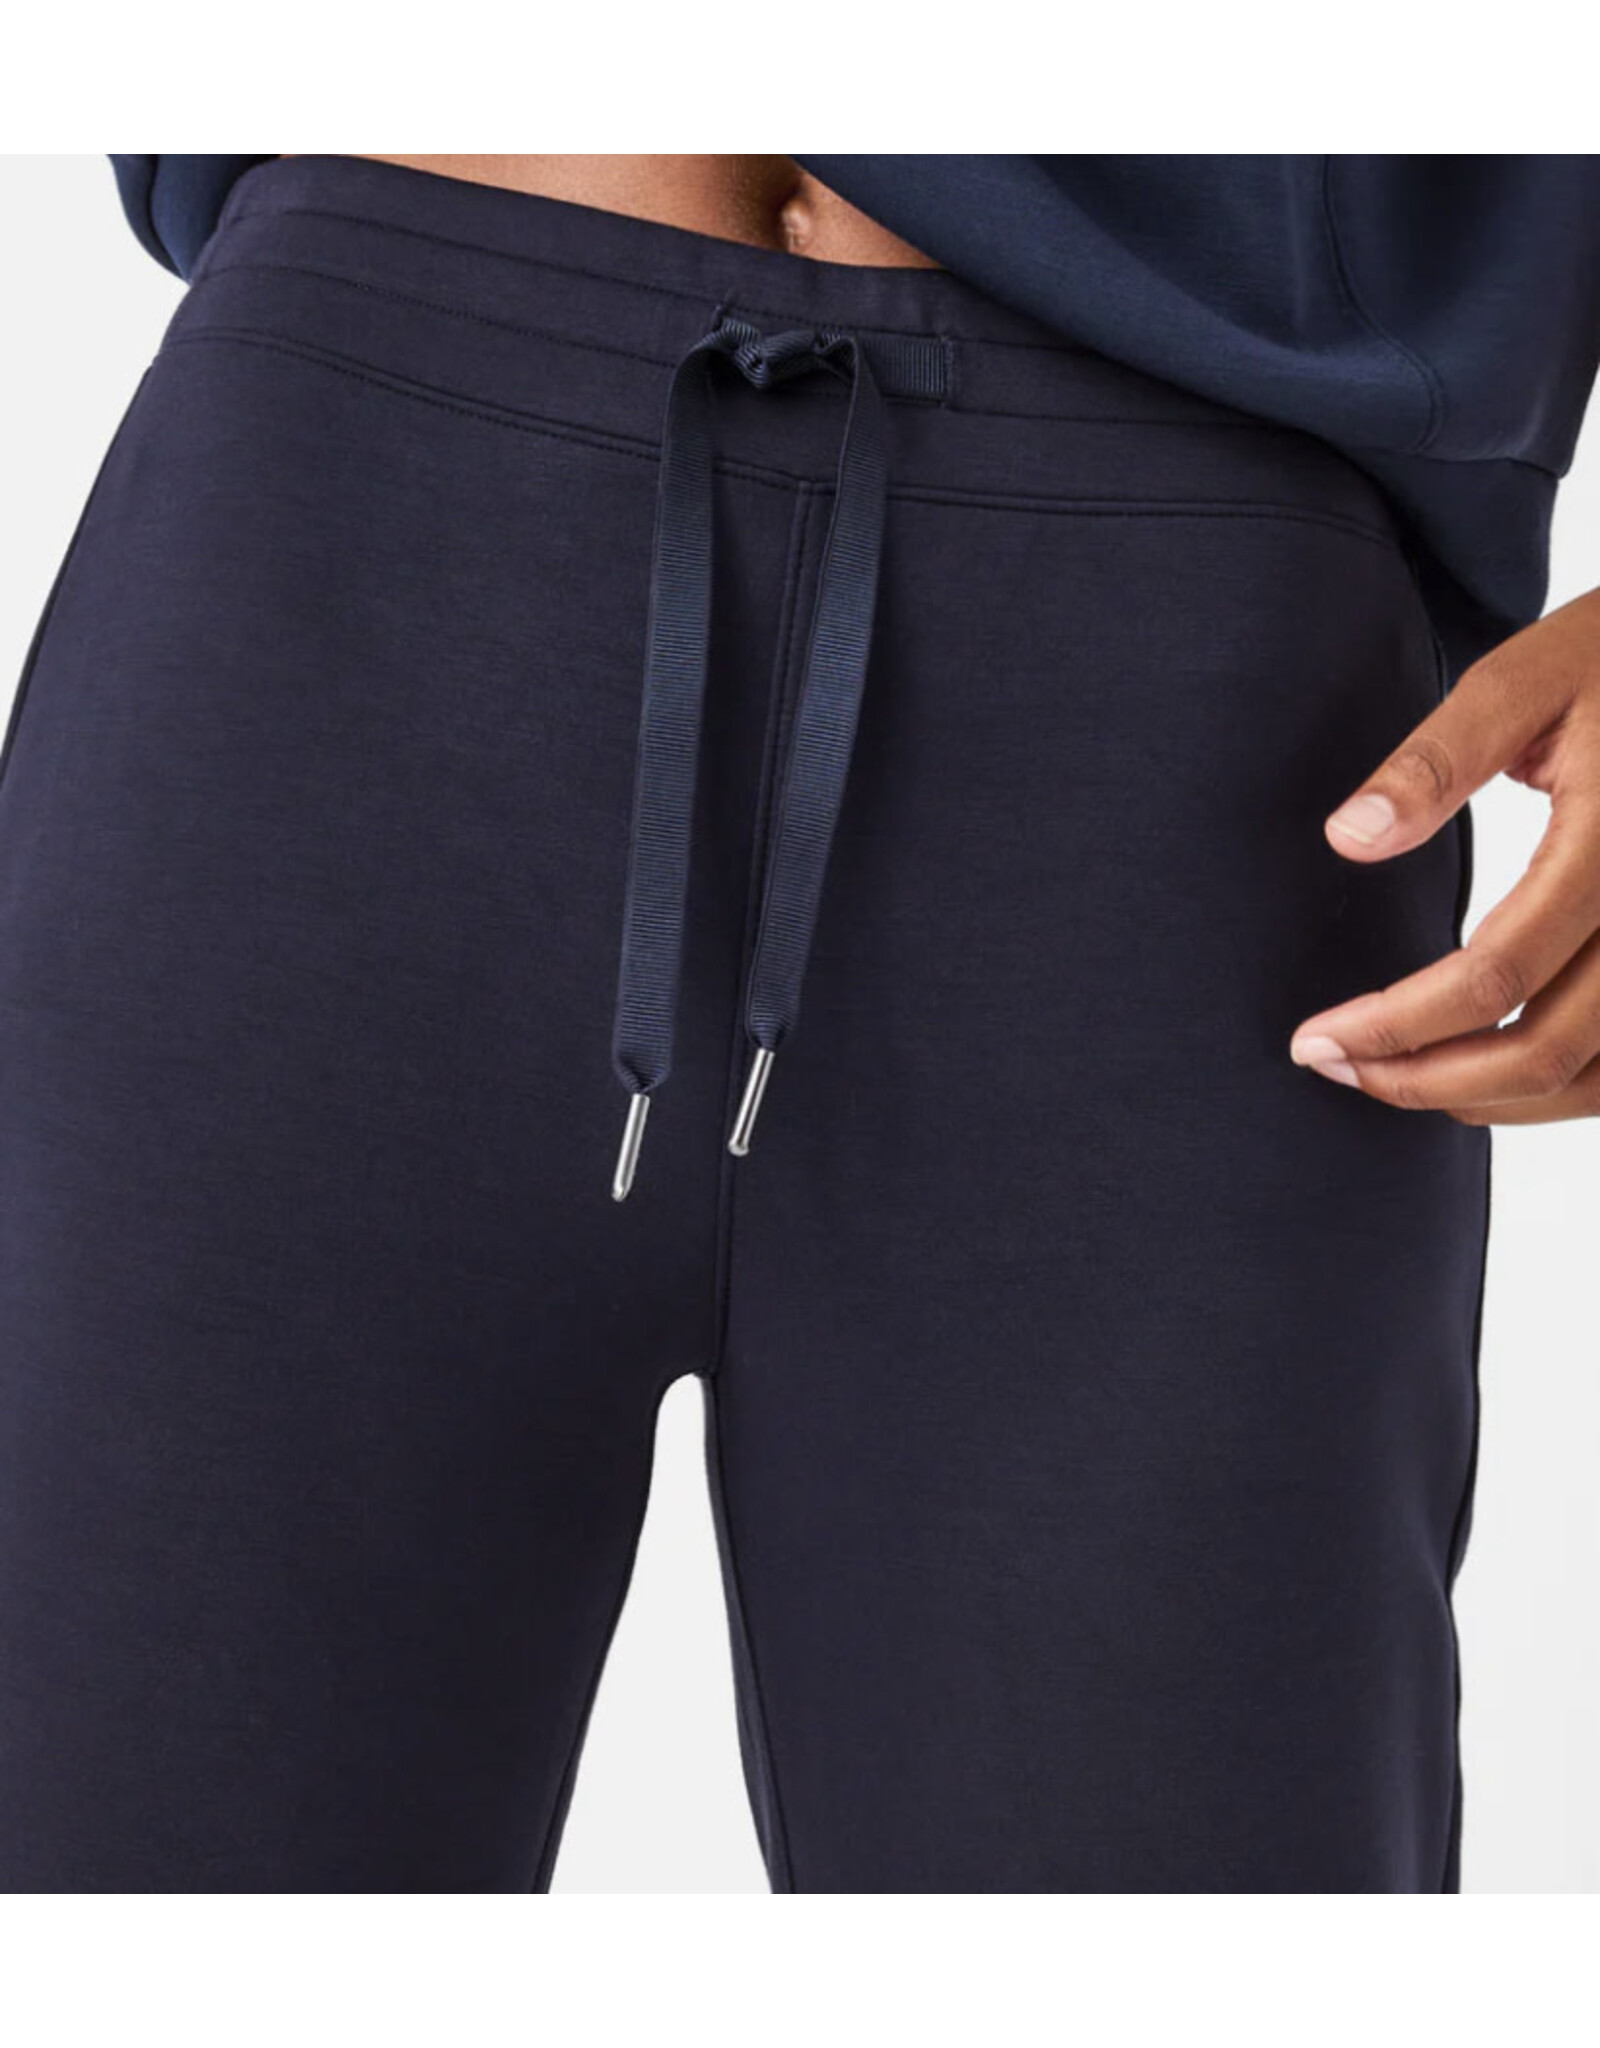 Spanx Air Essentials Tapered Pant in Navy